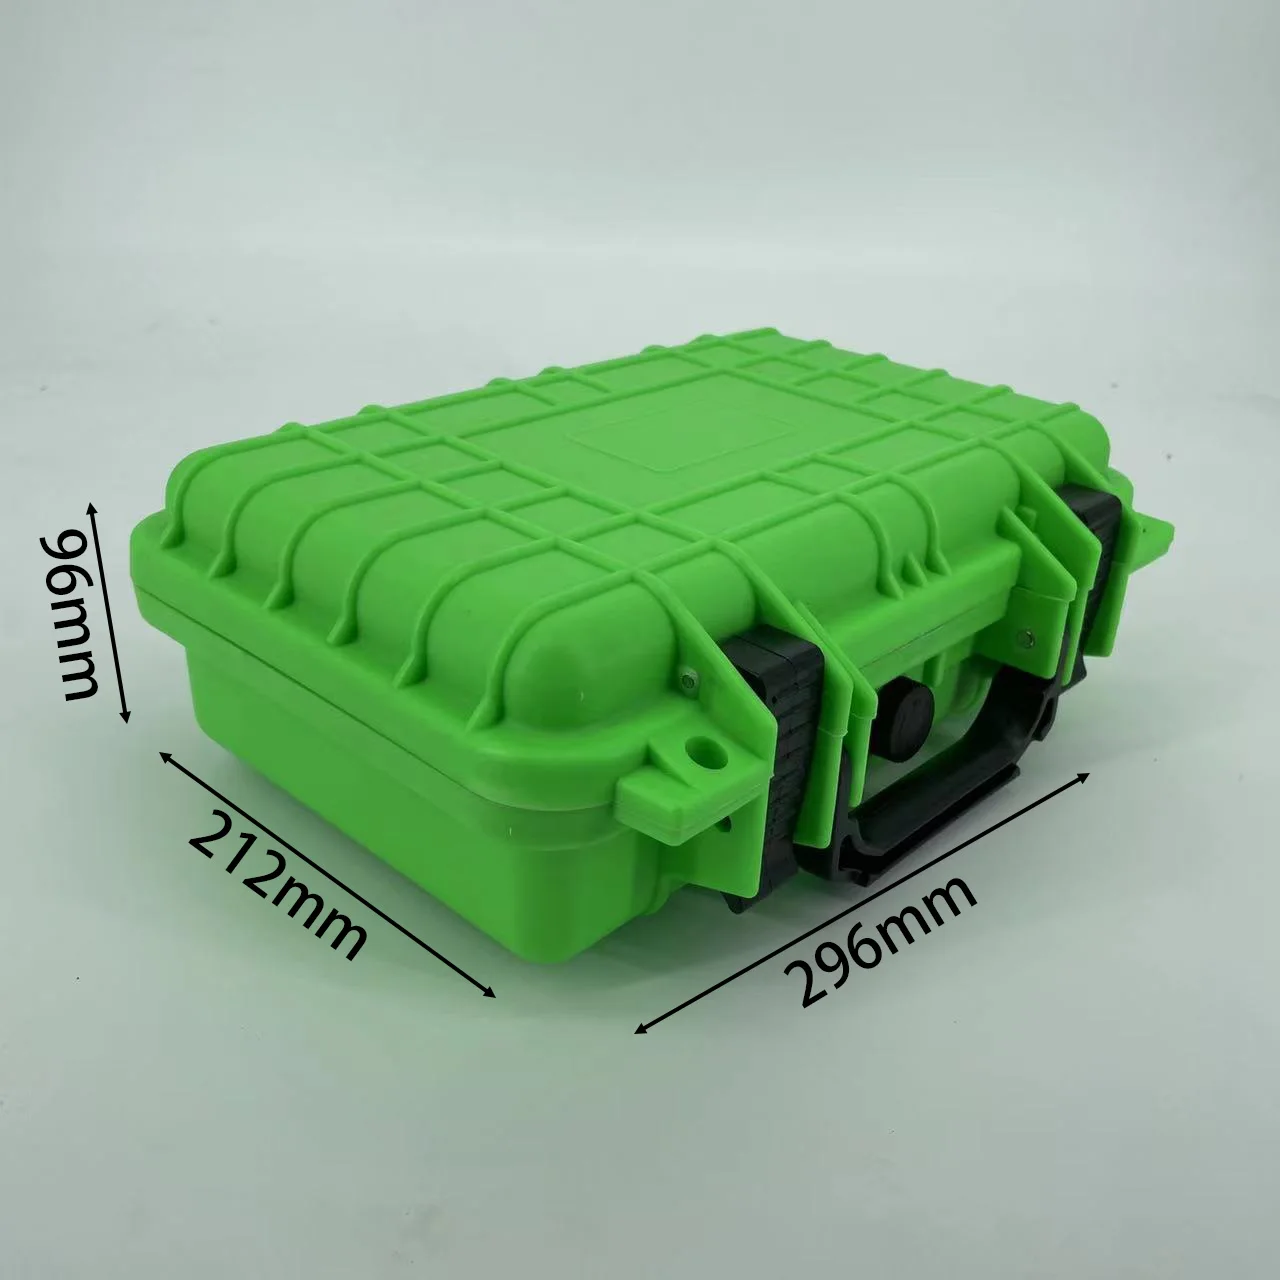 

Green case DPC034-1 high end IP67 waterproof plastic suitcase protective flight first aid kit case with foam insert